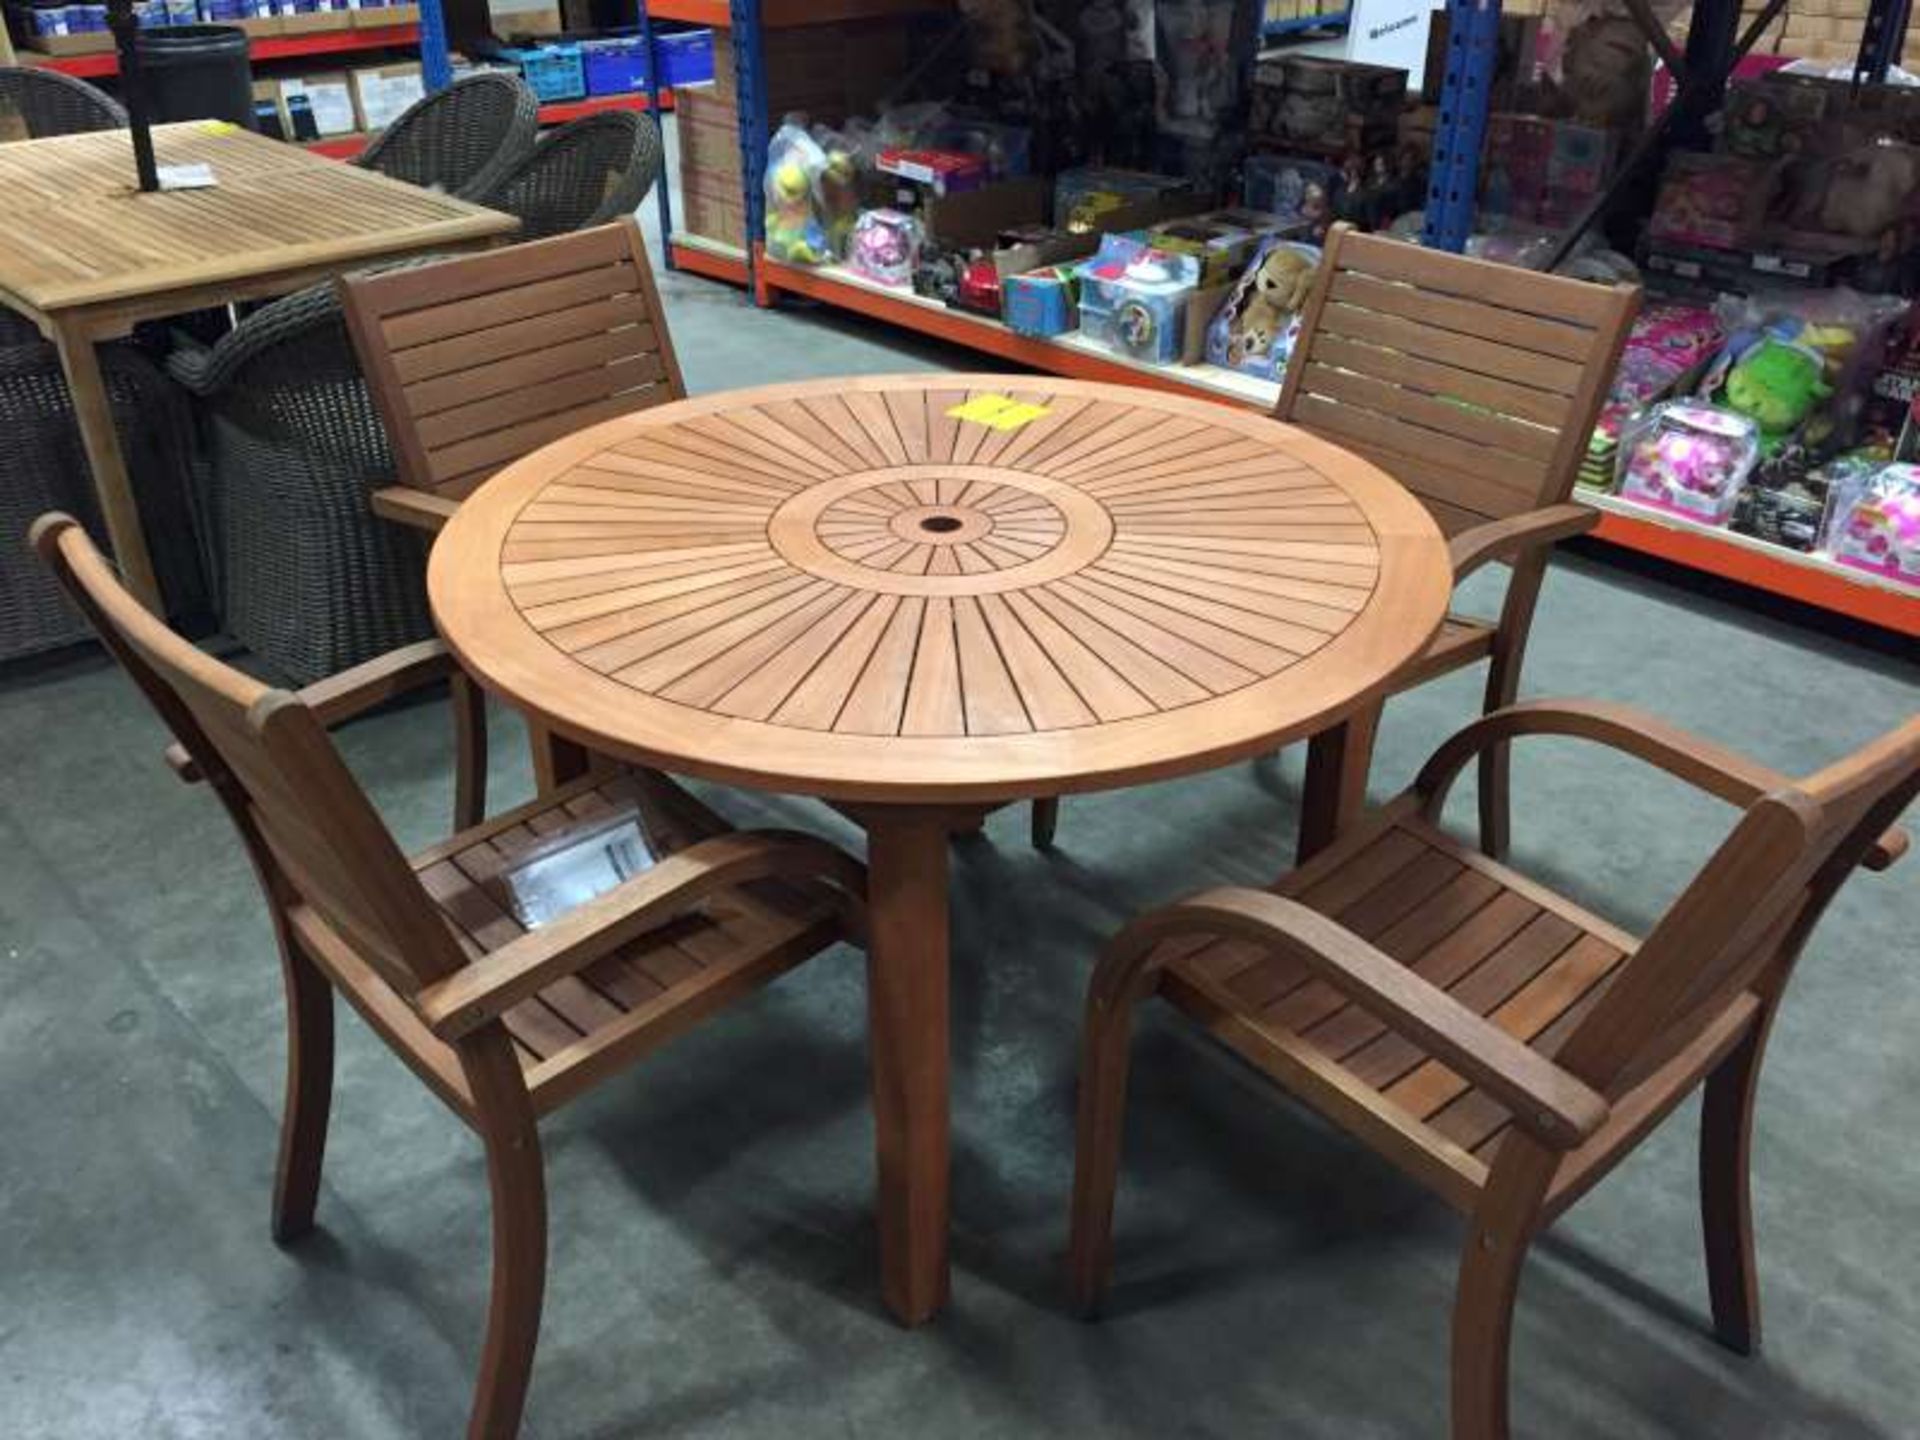 BRAND NEW BOXED ALMERIA ROUND GARDEN TABLE WITH 4 X ALMERIA STACKING CHAIRS